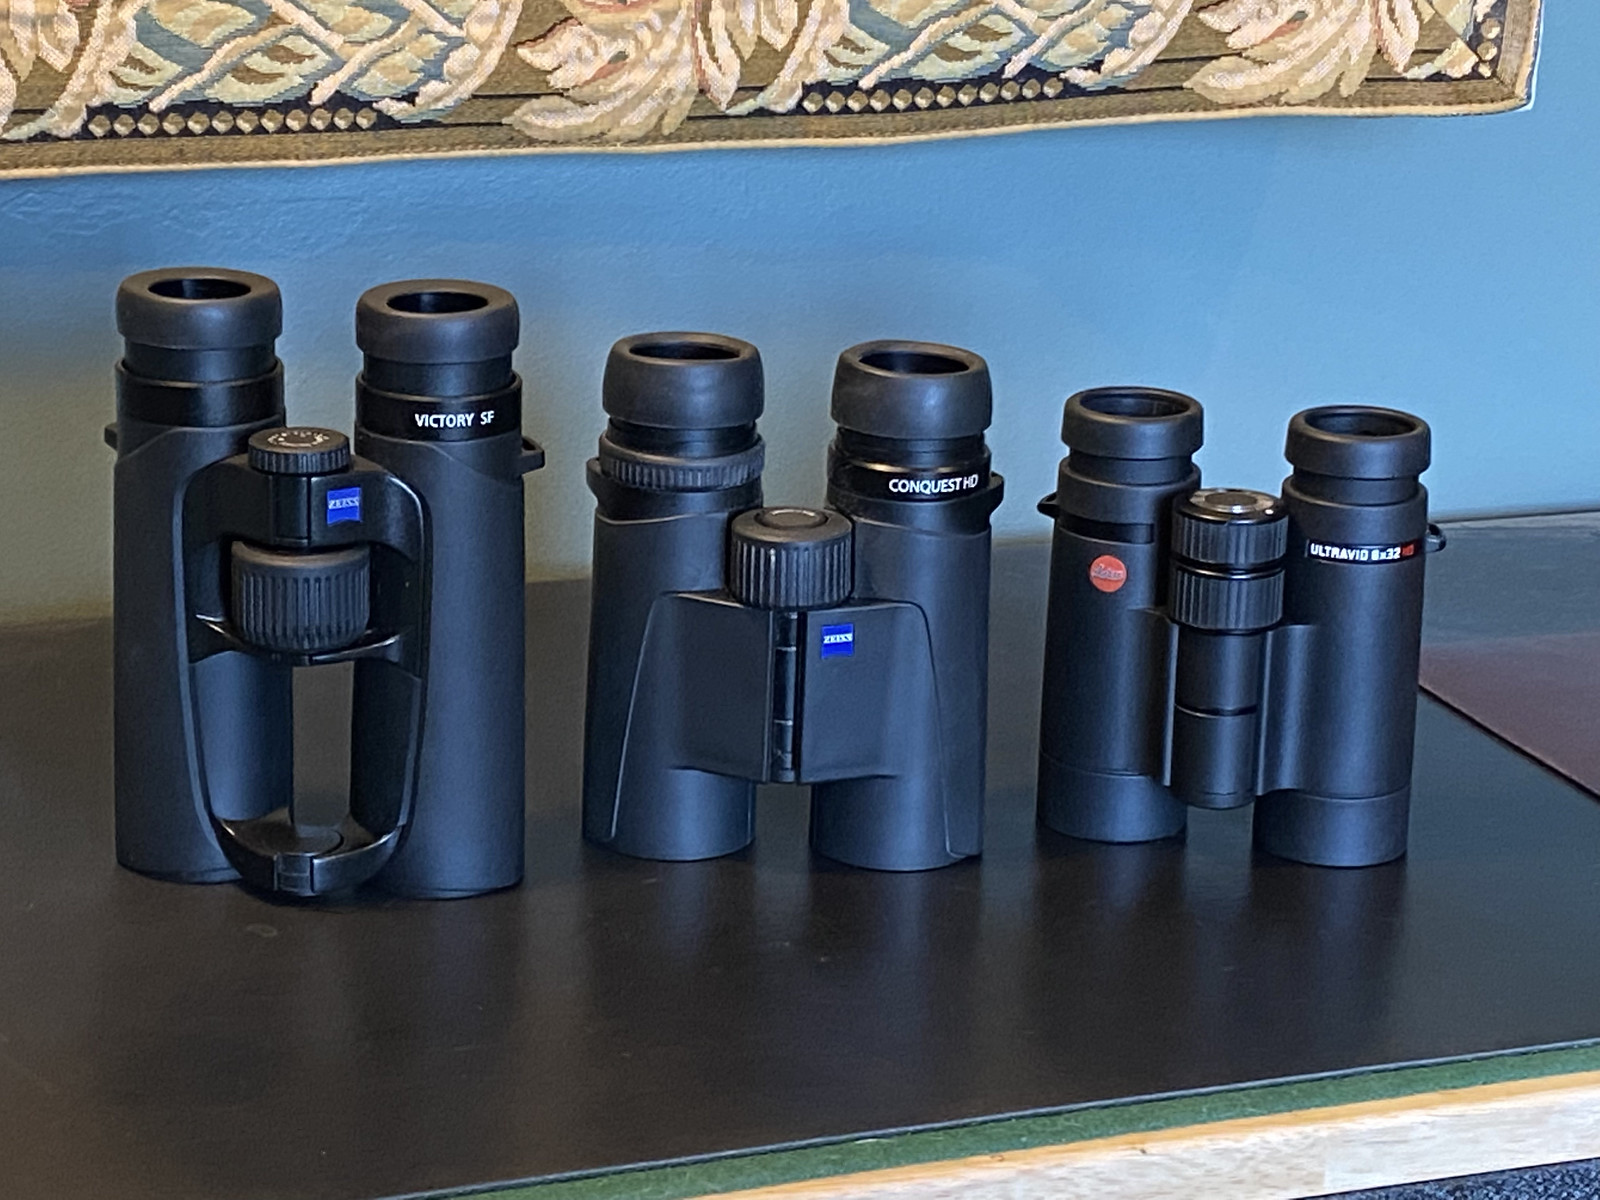 Zeiss lover gets wooed by the Leica "enhanced reality" look | BirdForum